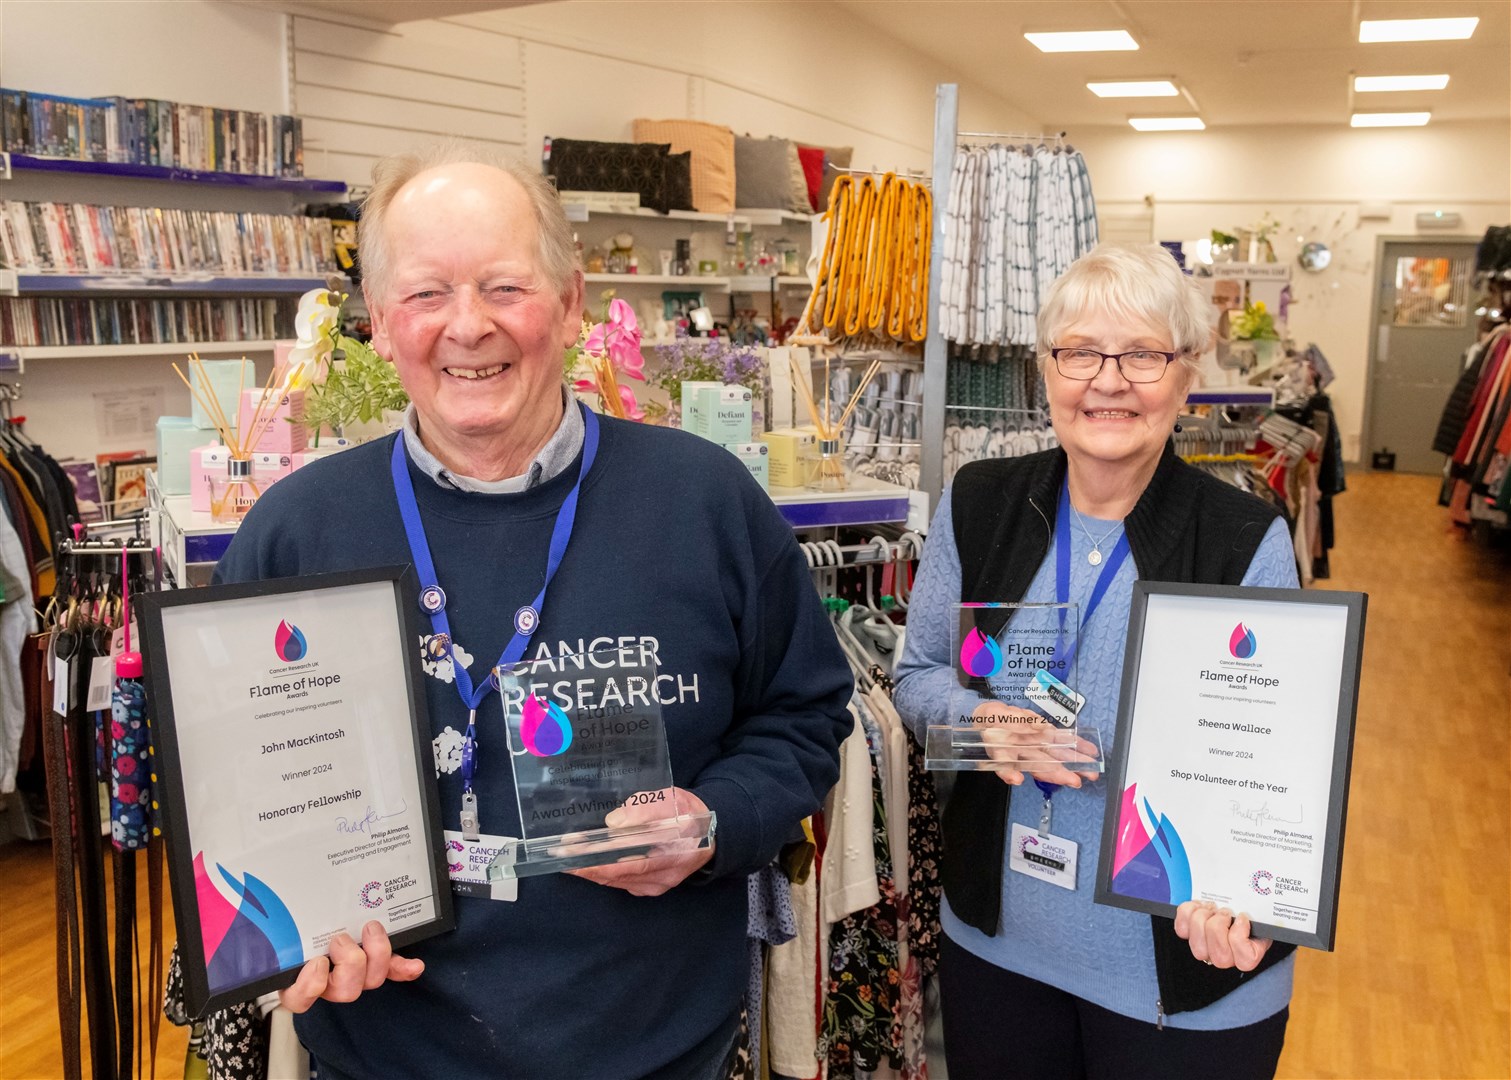 John MacKintosh won the Honorary Fellowship Award and Sheena Wallace won Volunteer of the Year at the annual Flame of Hope awards in Edinburgh.Picture: Beth Taylor